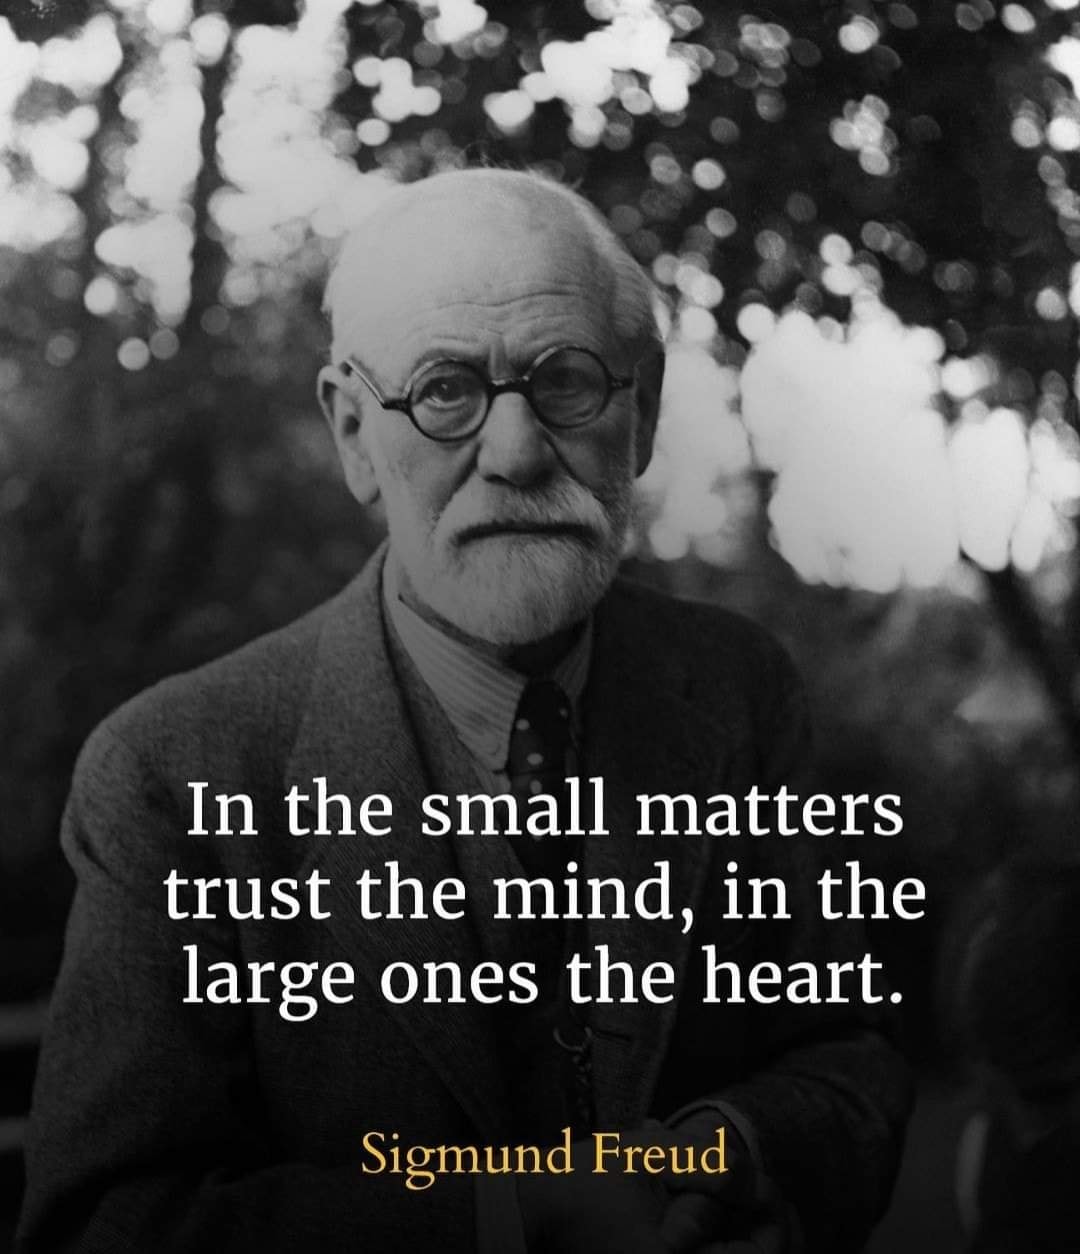 In the small matters trust the mind, in the large ones the heart.